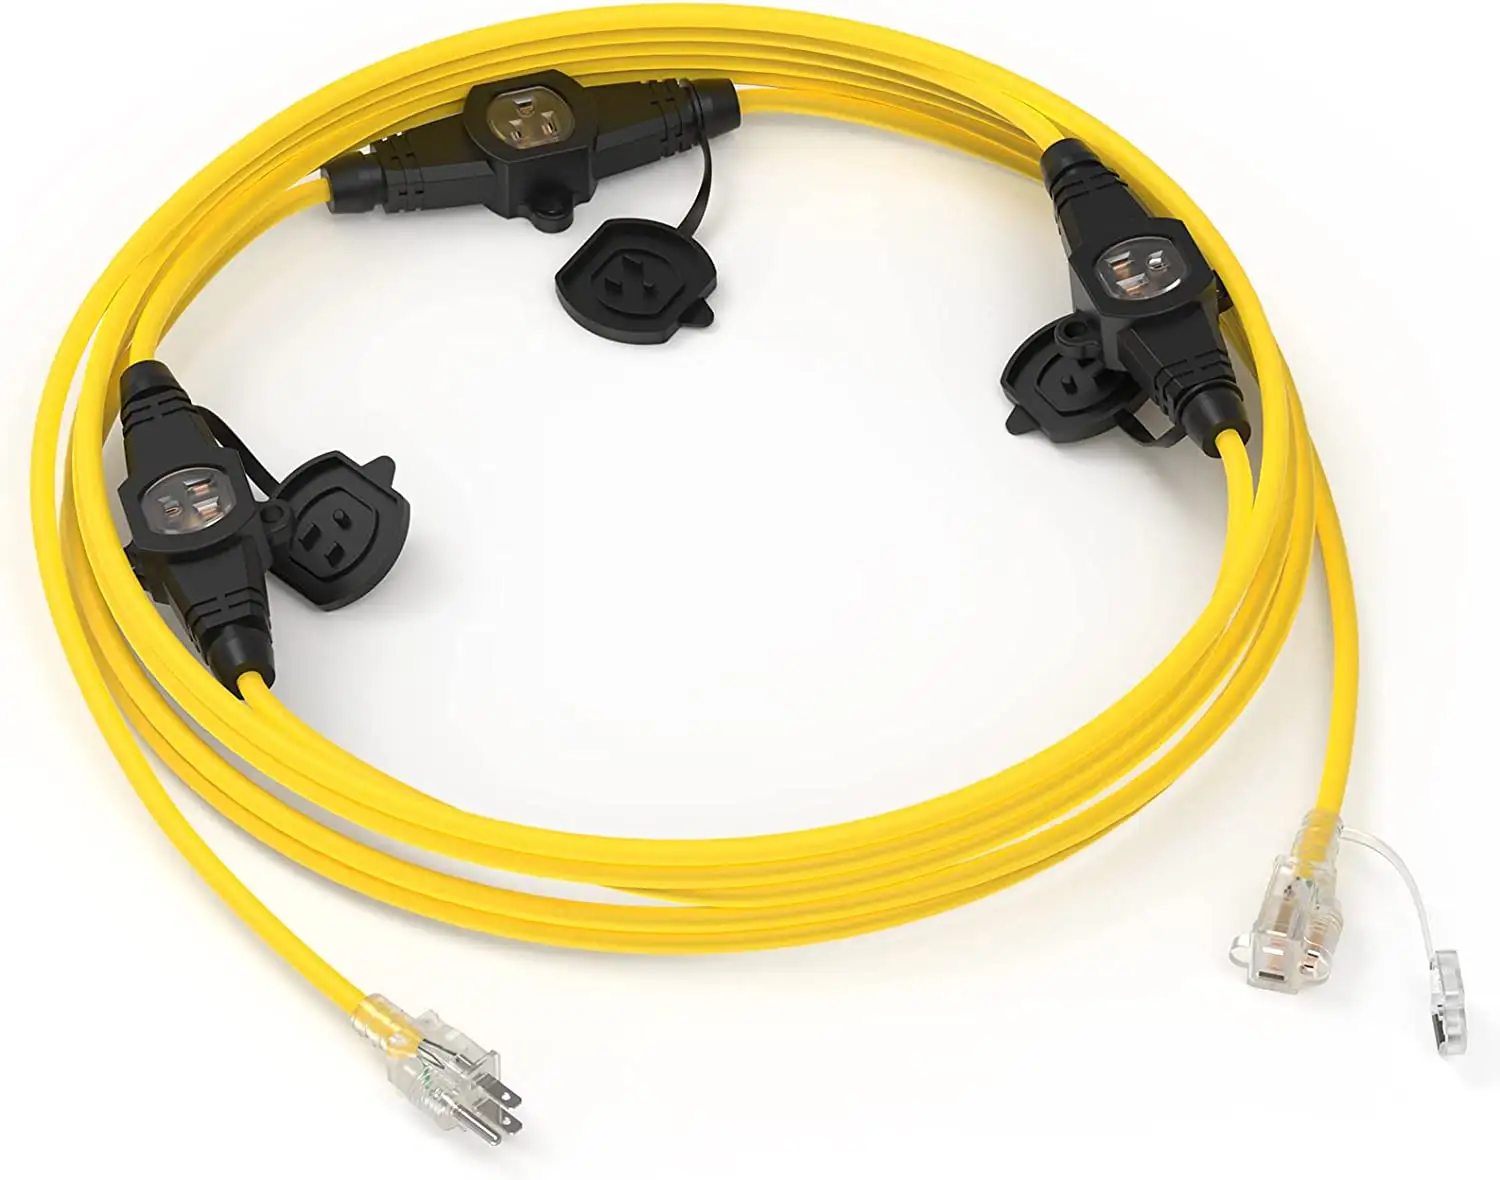 25FT 12 Gauge Outdoor Power Extension Cord NEMA 5-15R Four Outlet Cord Splitter UL Listed with LED Indicator